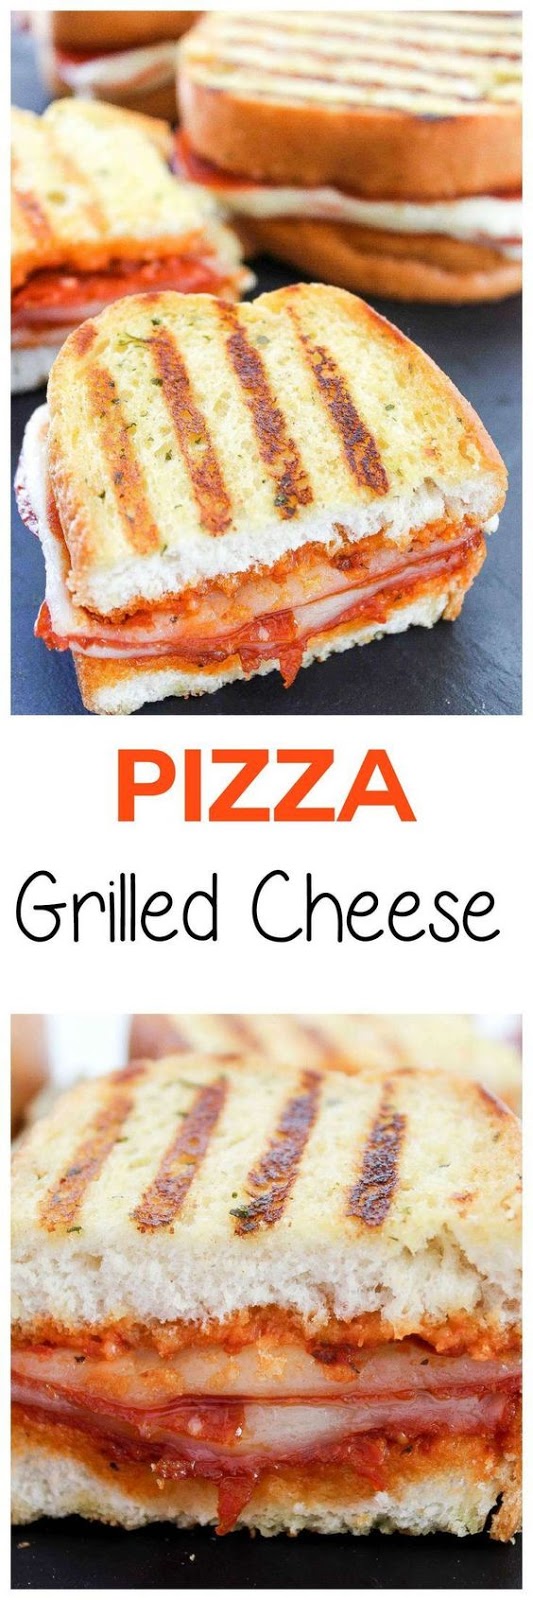 All the flavors of pizza in a SUPER easy to make grilled cheese sandwich. Tons of spicy pepperoni and gooey cheese make this an irresistible lunch or dinner!